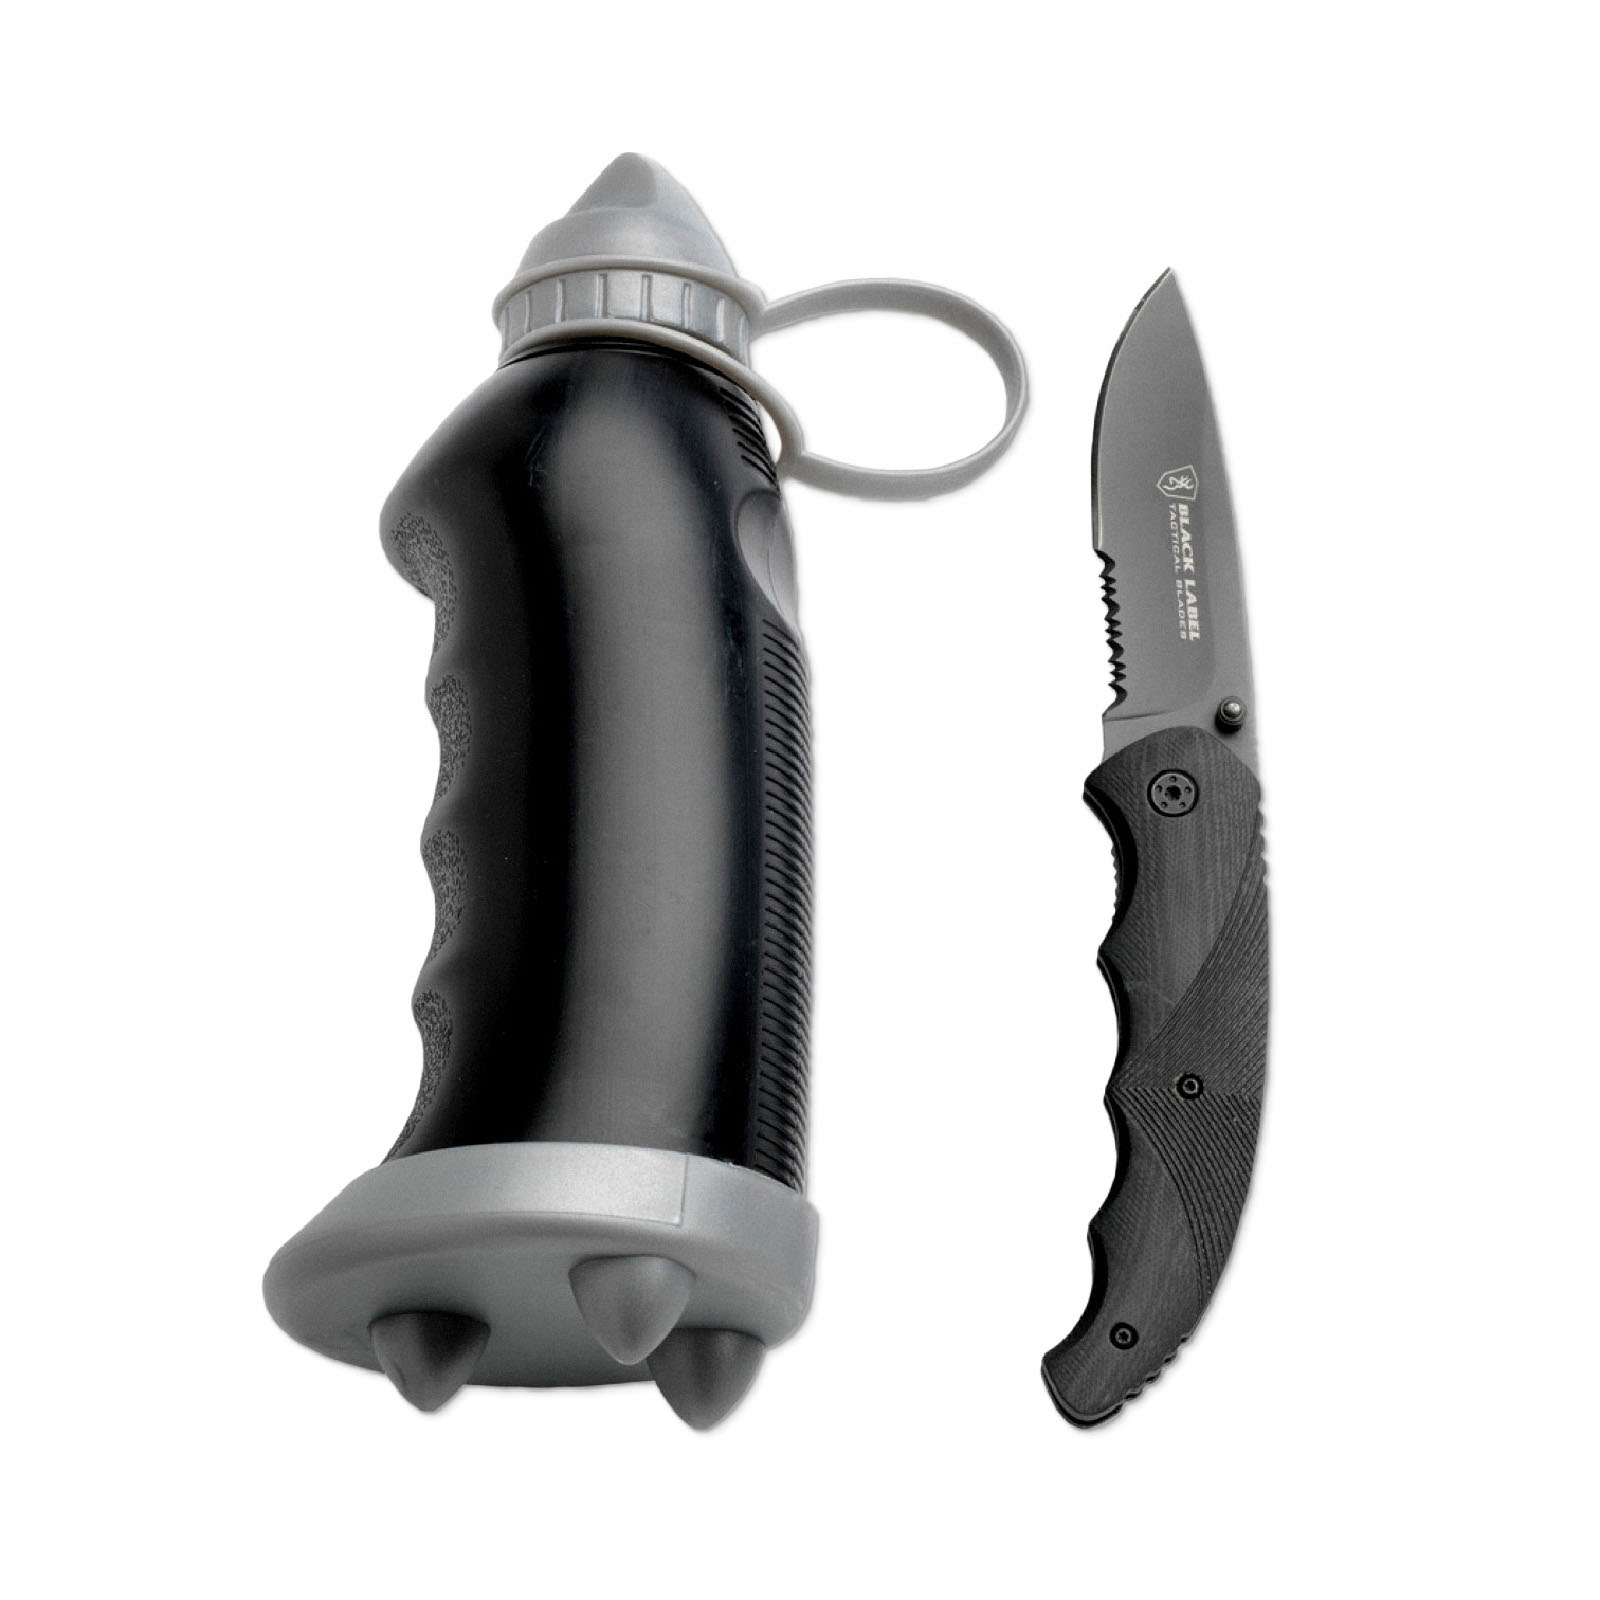 Aquaforce Tactical Set, knife and water bottle, perfect for survival and all outdoor activities